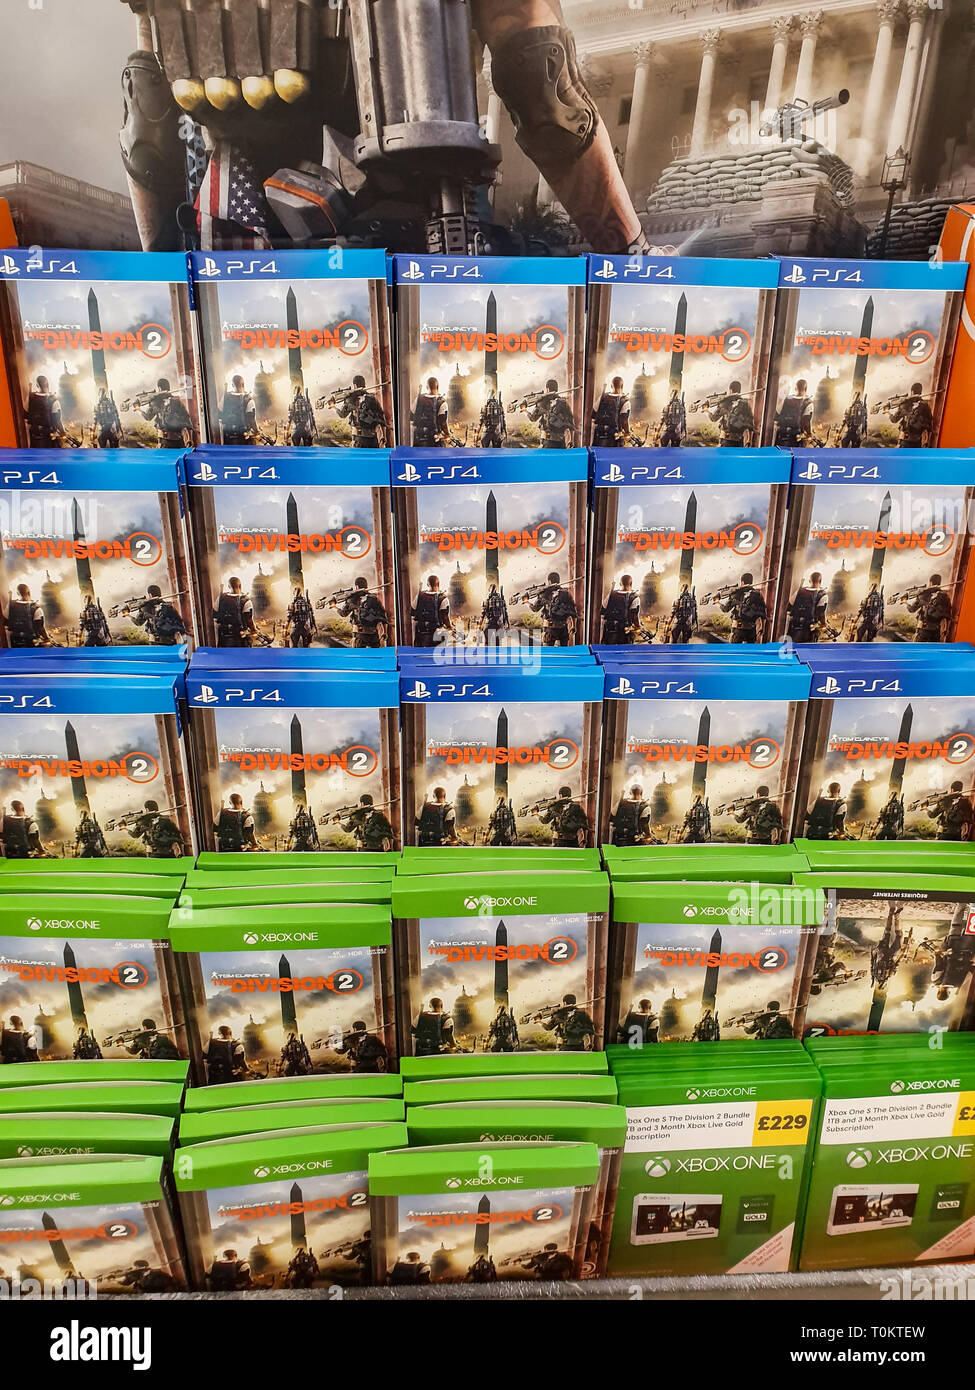 SHEFFIELD, UK - 20TH MARCH 2019: Division 2 for sale in Tesco for both the XBox One and Playstation 4 Stock Photo